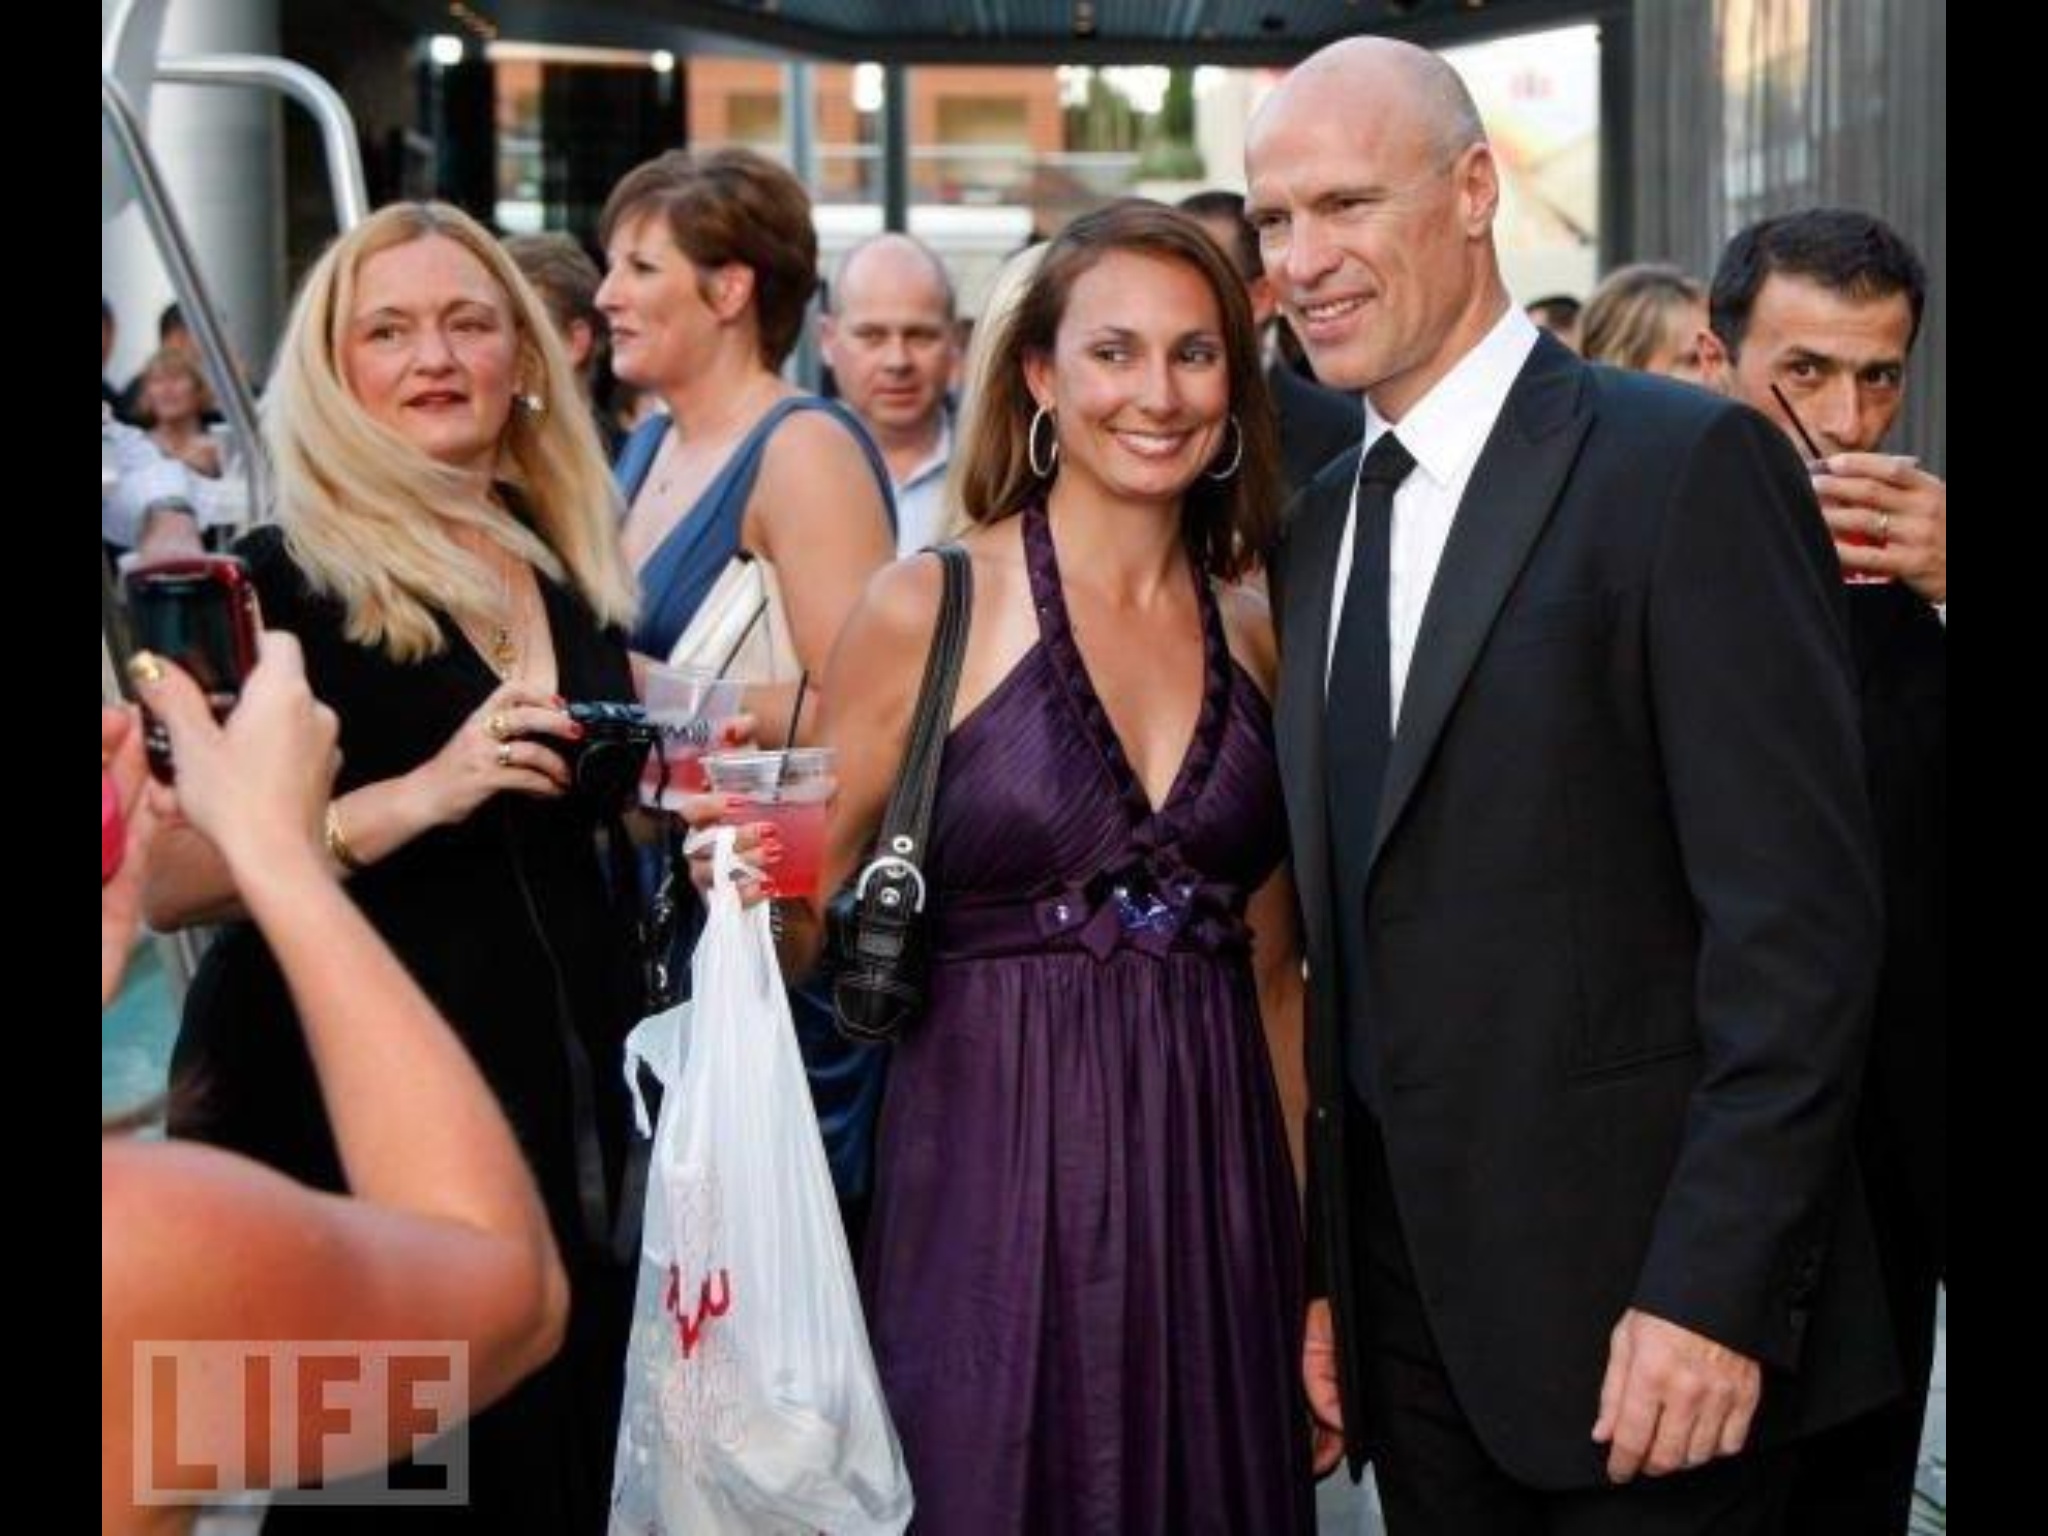 Life online with Actress Kelly Barrett and Mark Messier 2009 NHL Awards Las Vegas